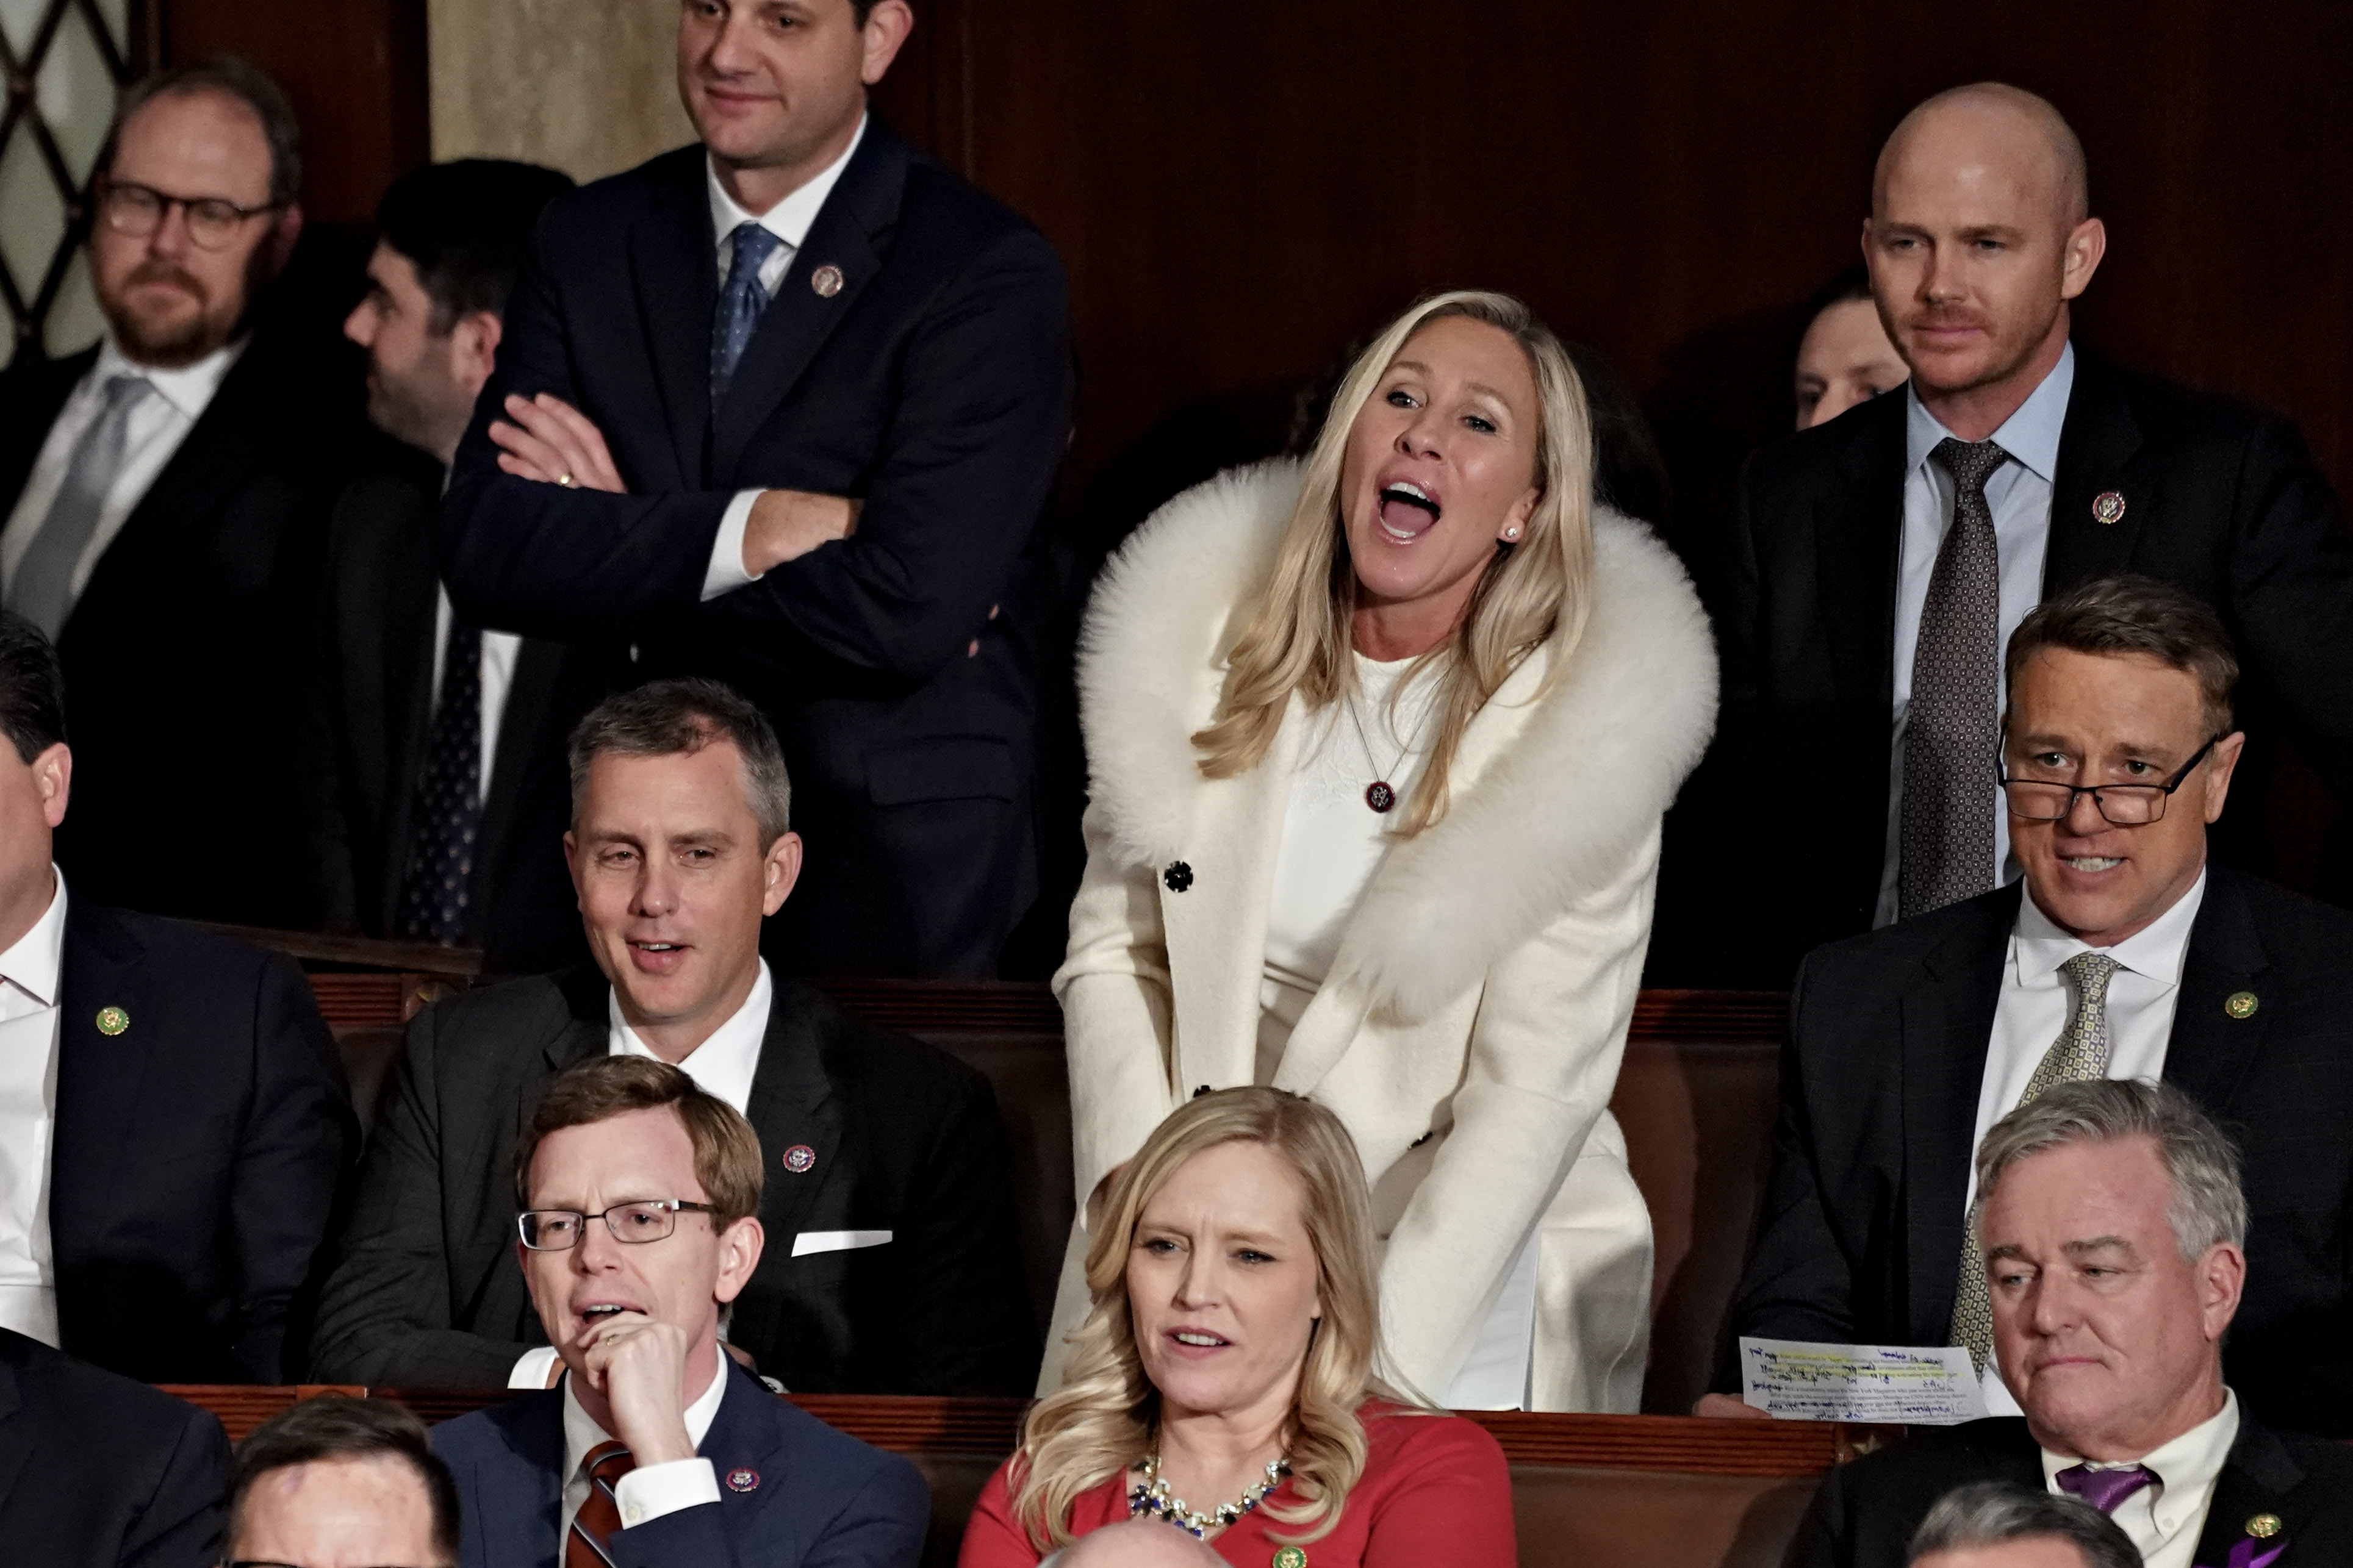 Representative Marjorie Taylor Green, a Republican from Georgia, yelling during President Joe Biden’s State of the Union address earlier this month. The new GOP majority in the House of Representatives has indicated it wants major spending concessions in exchange for raising the debt limit.